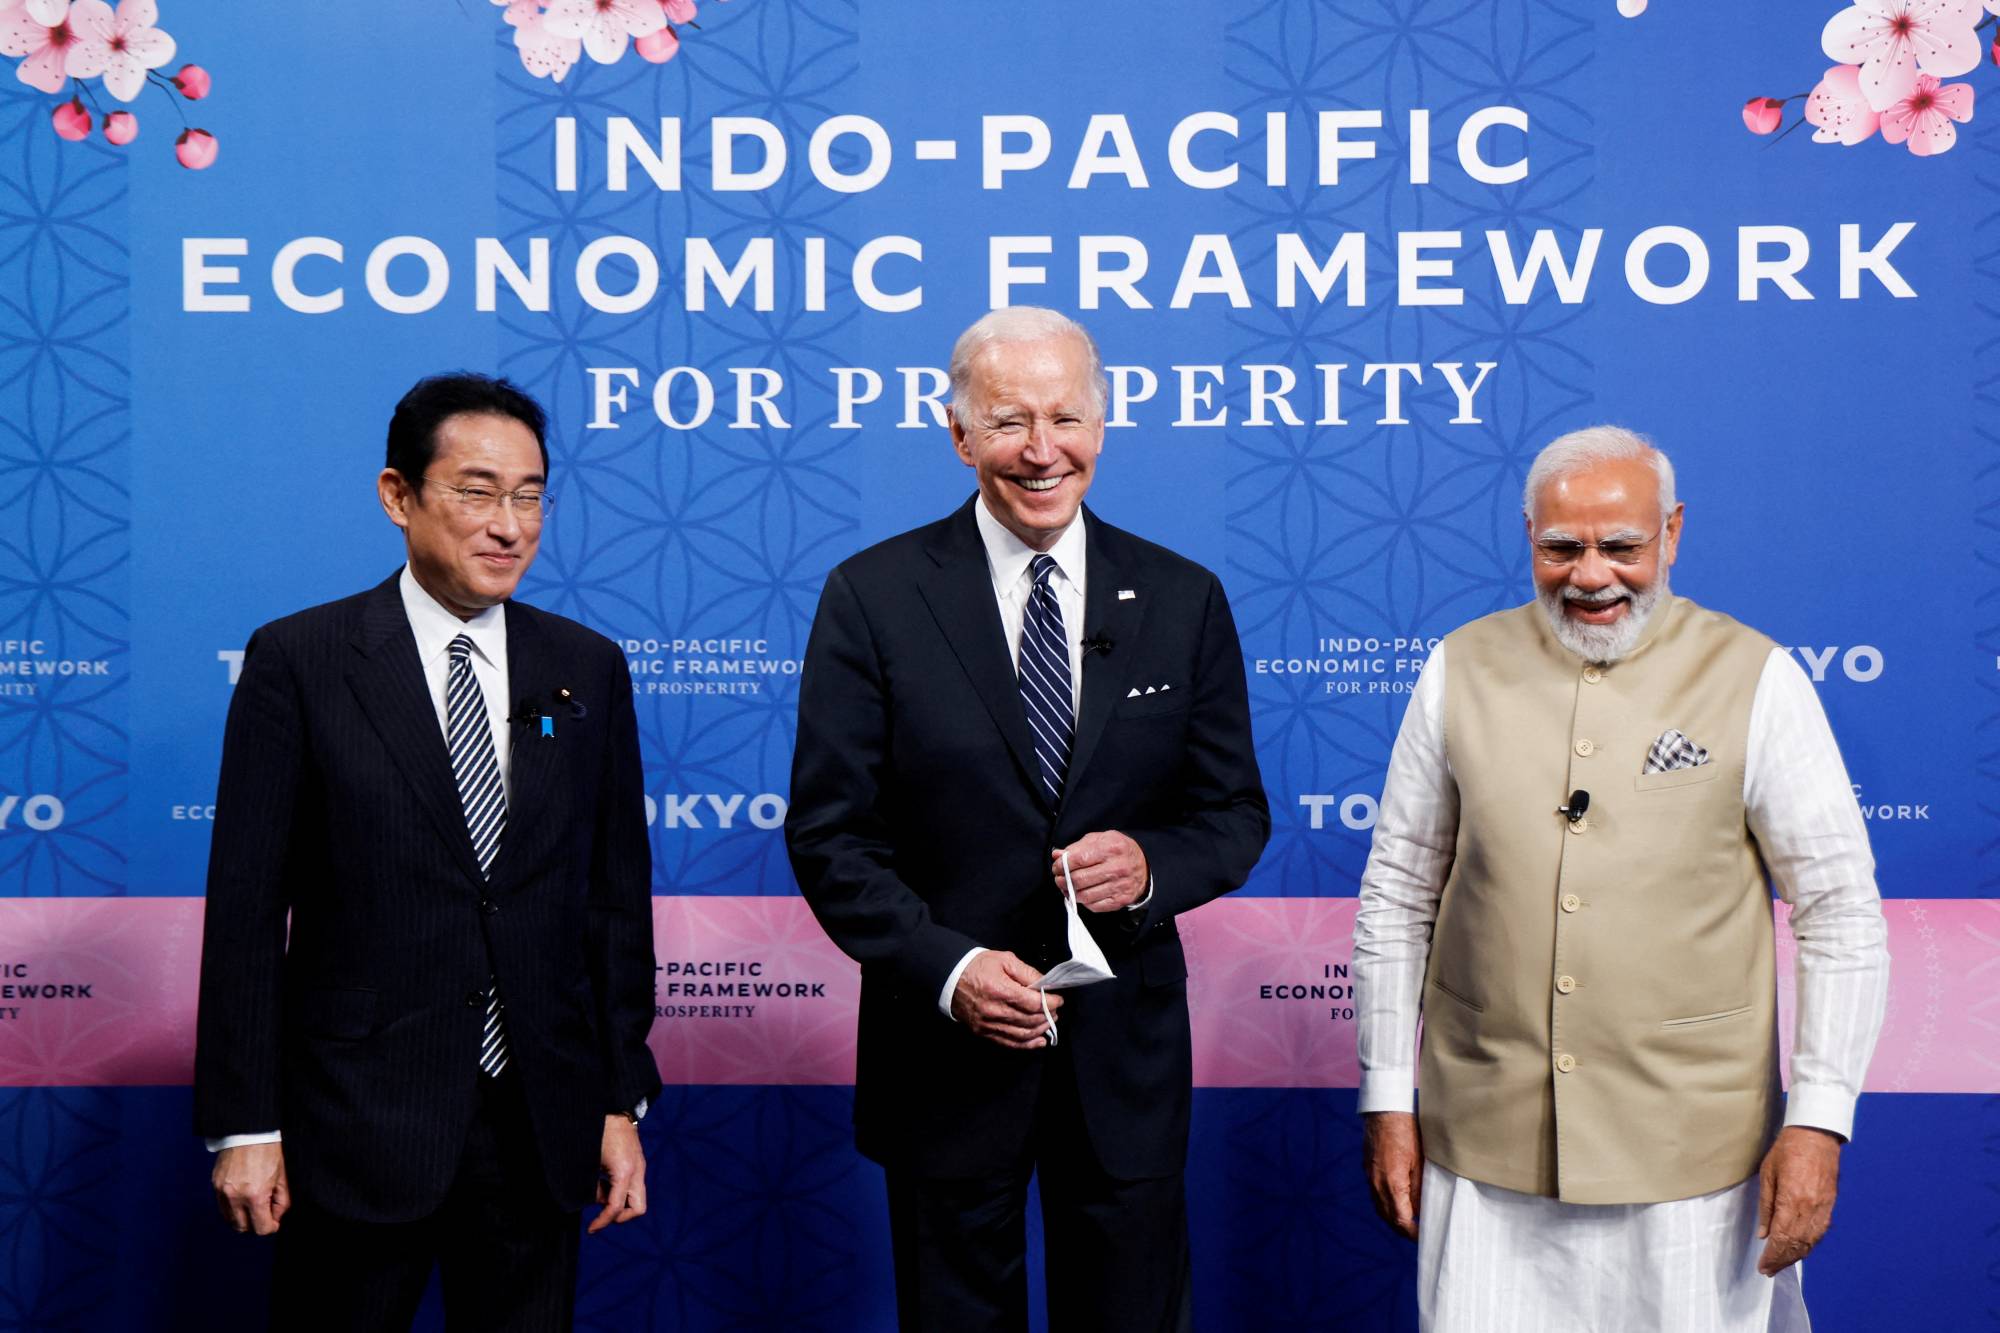 The Indo-Pacific Economic Framework (IPEF) and the decline of US Leadership